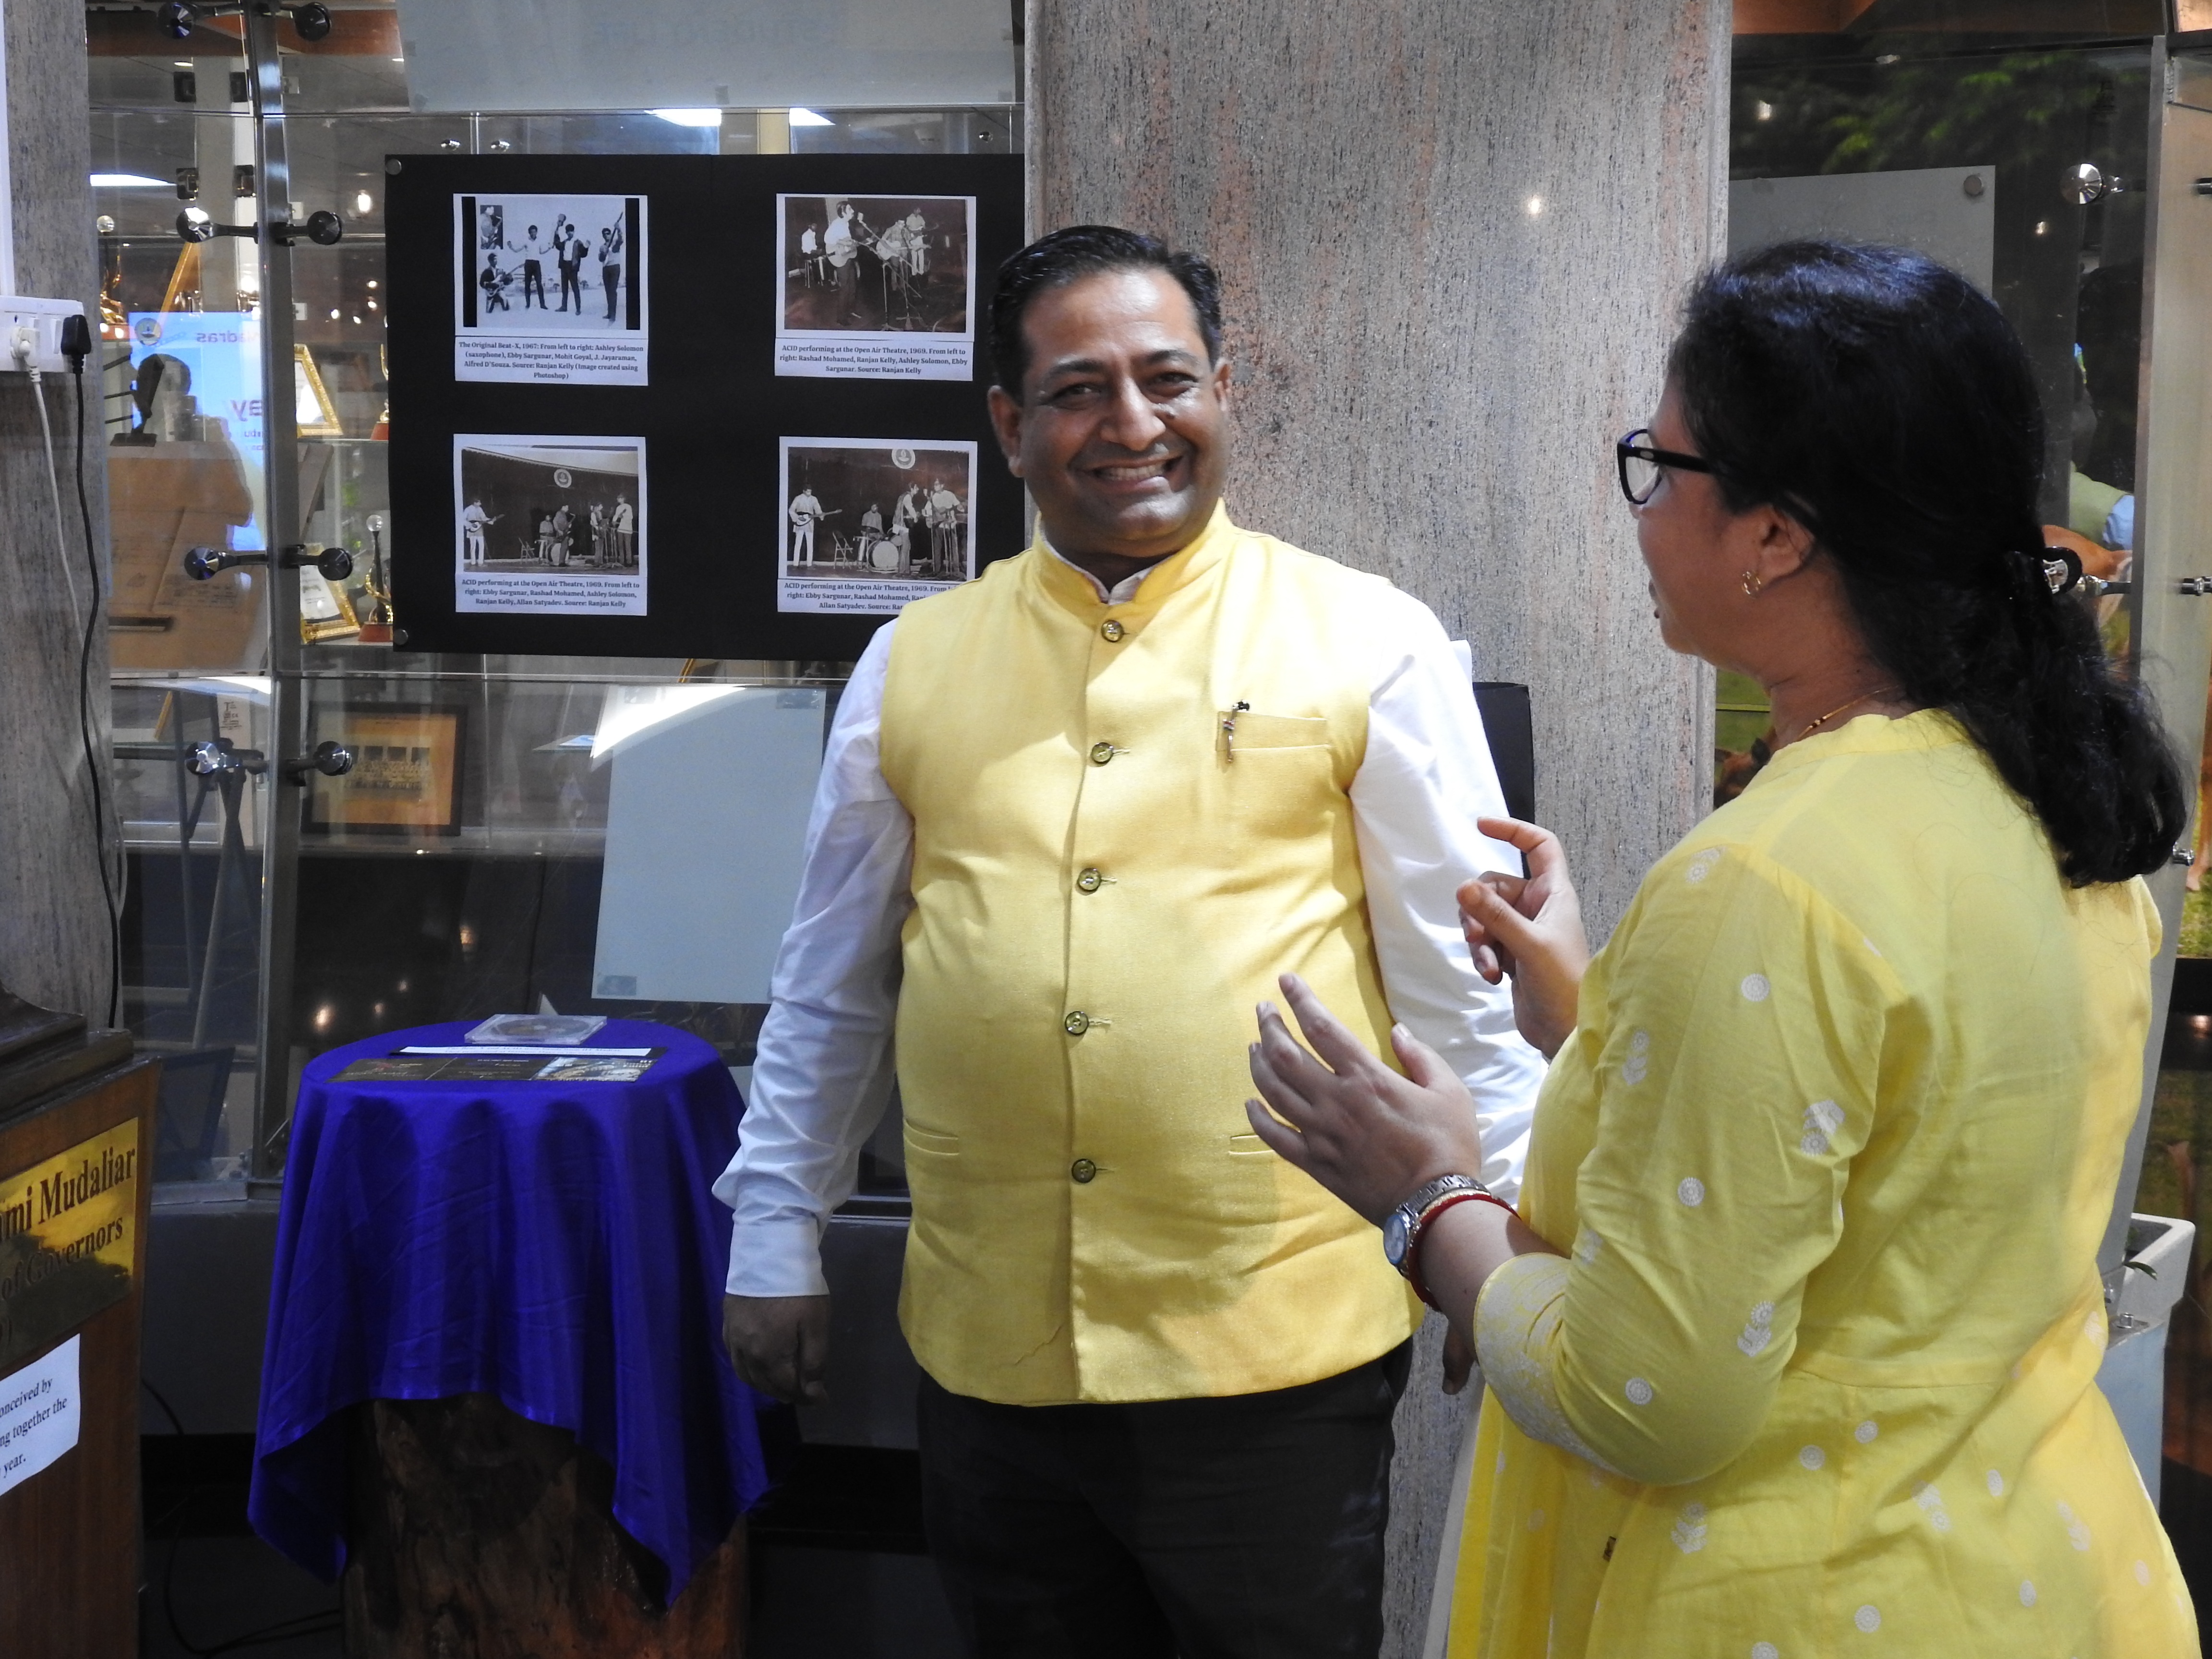 Ms. Mamata Dash escorts a member of the O.P. Jindal Global University around the Heritage Centre